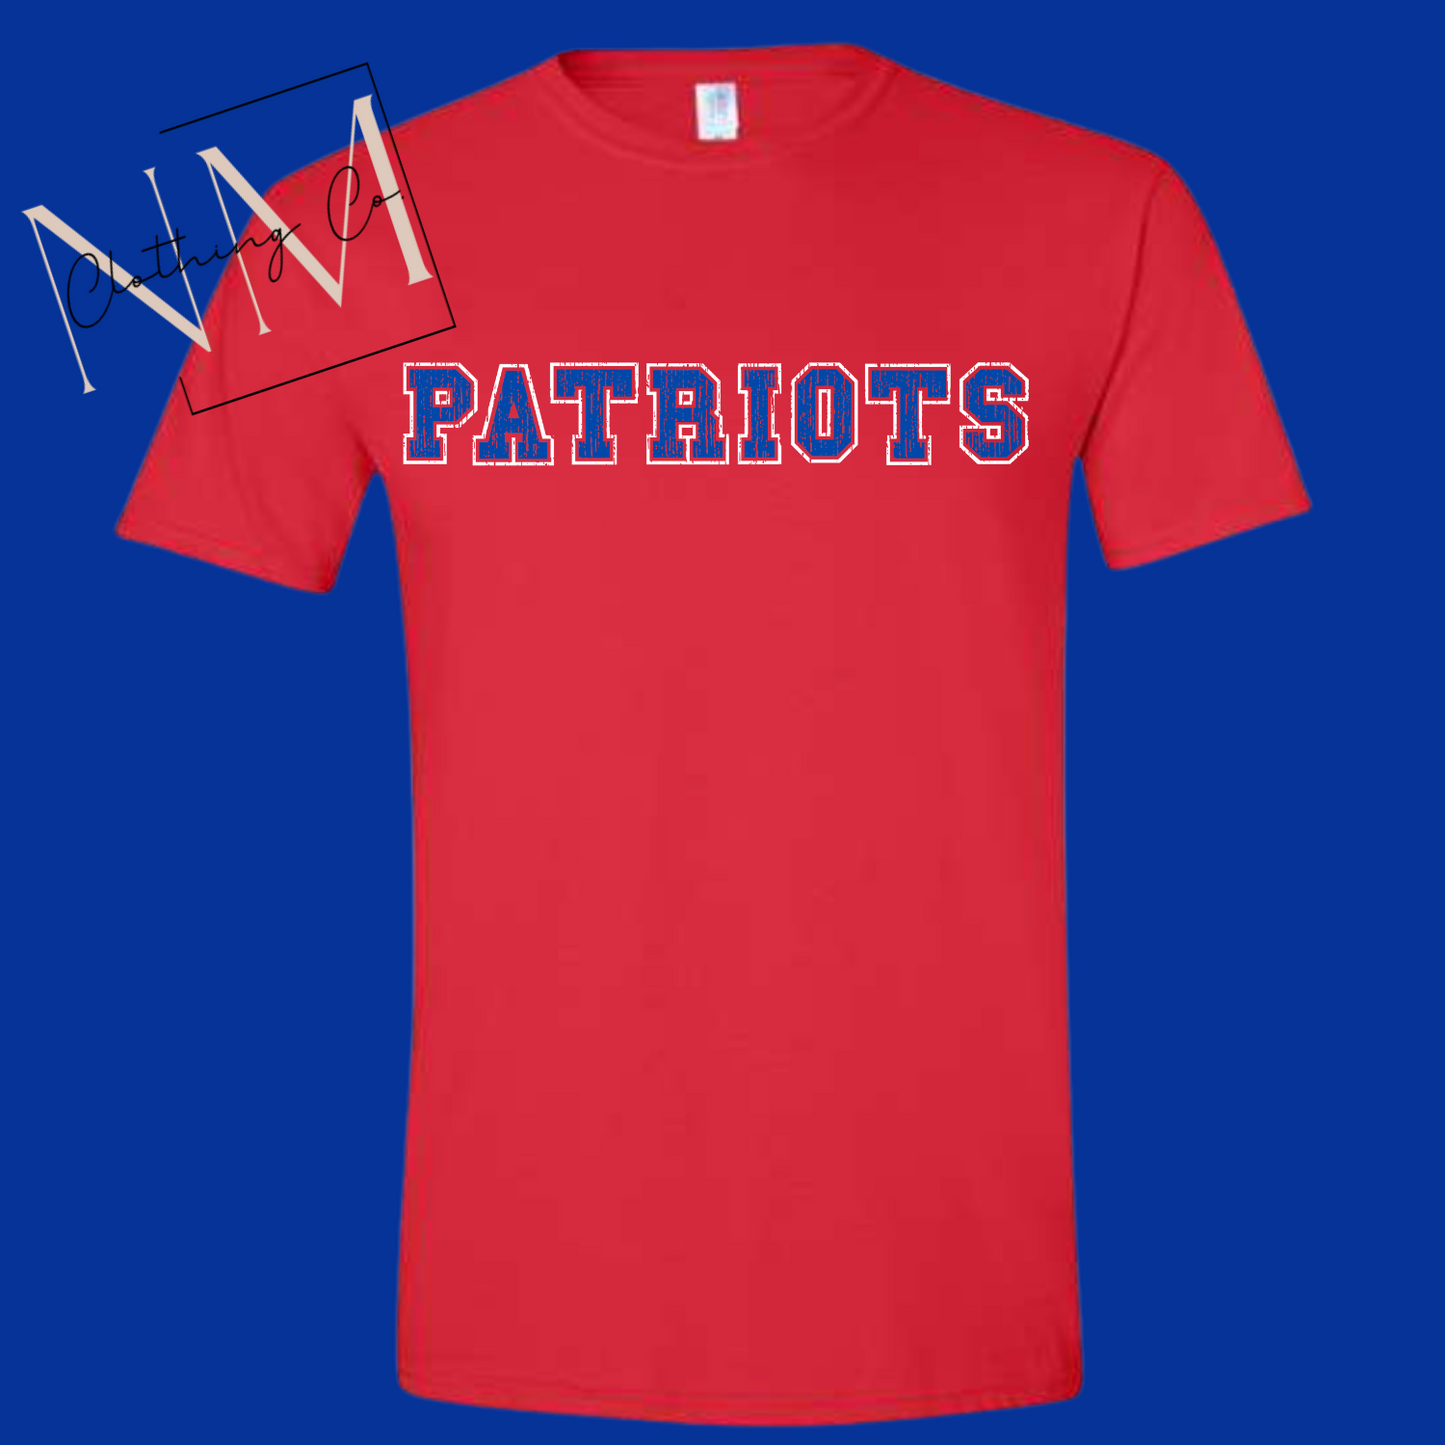 Patriots Distressed Tee Youth